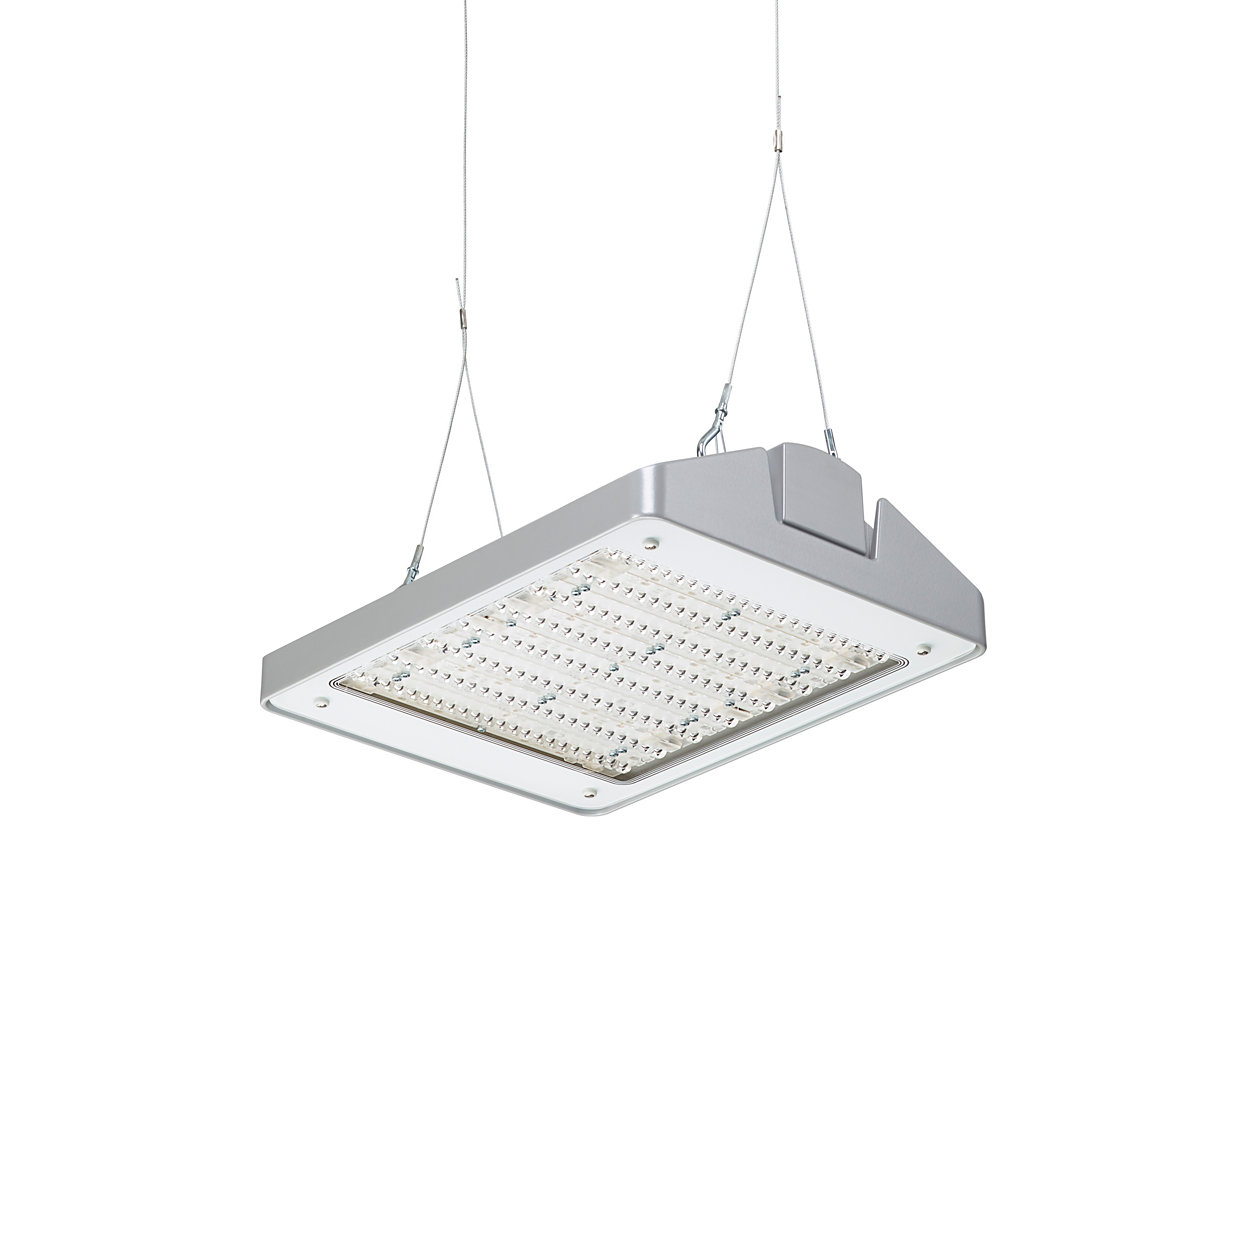 The new standard in industrial high-bay lighting, combining functionality with design